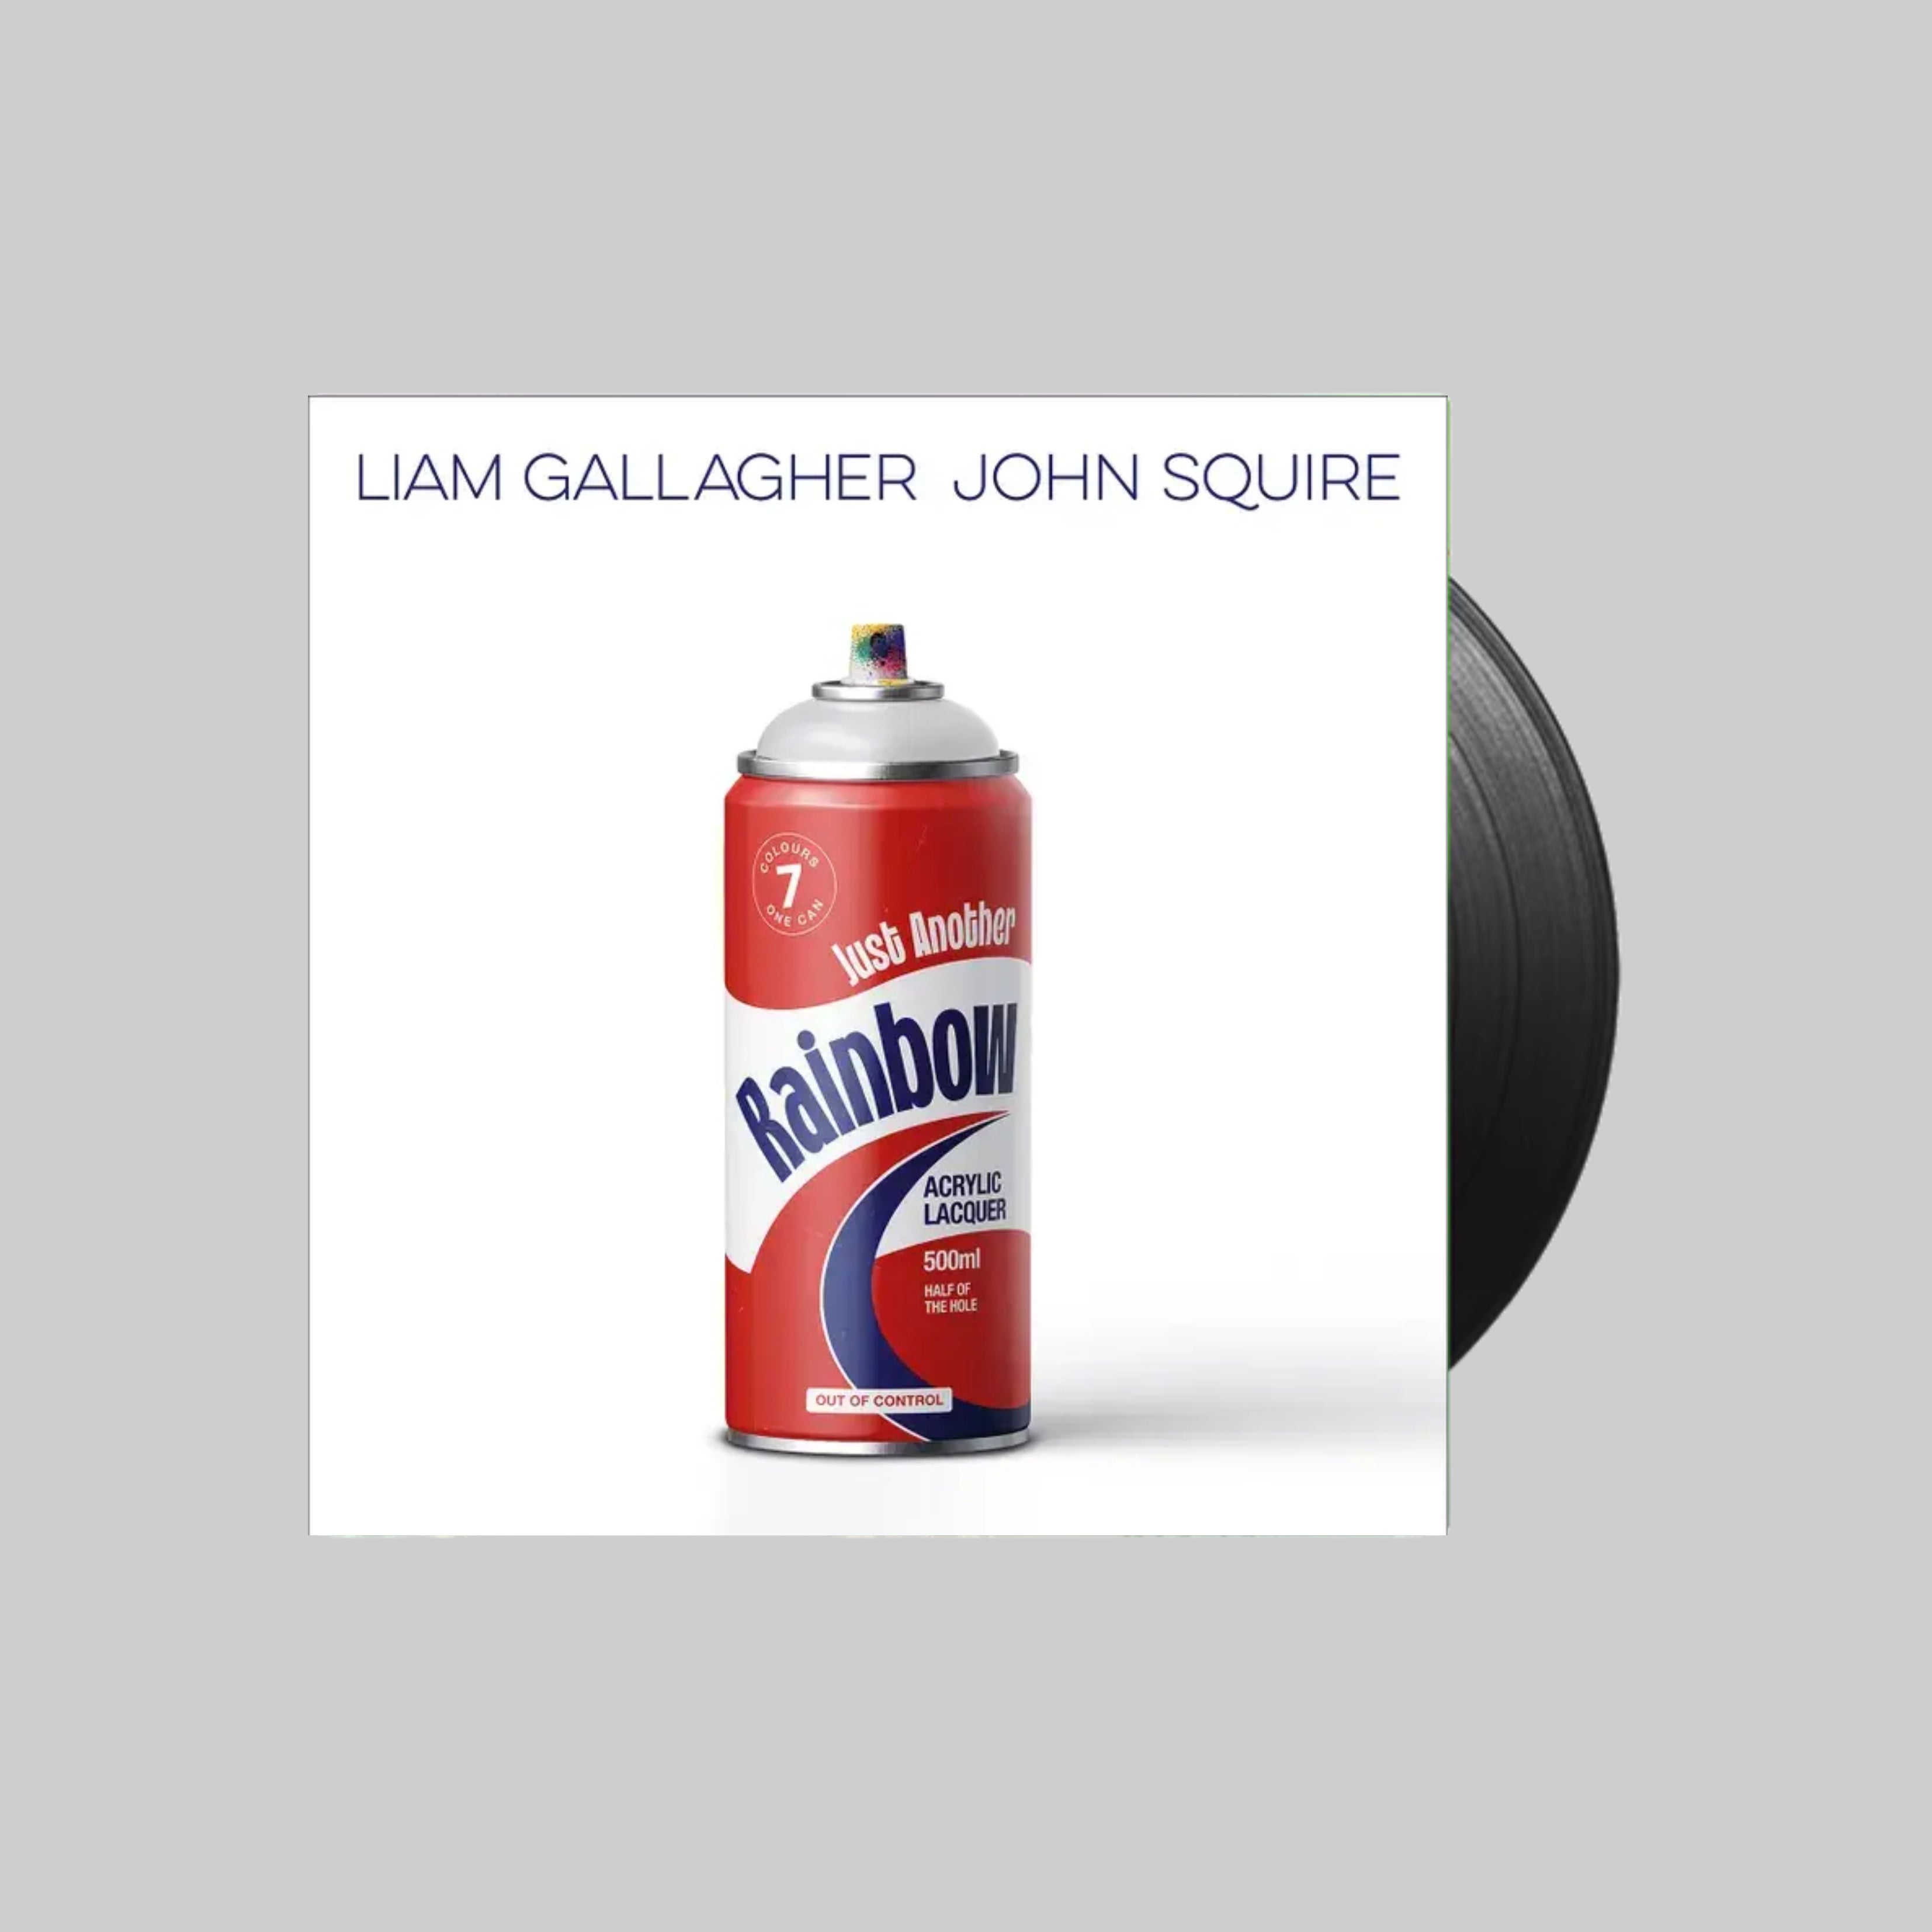 Liam Gallagher, John Squire - Just Another Rainbow: Vinyl 7" Single